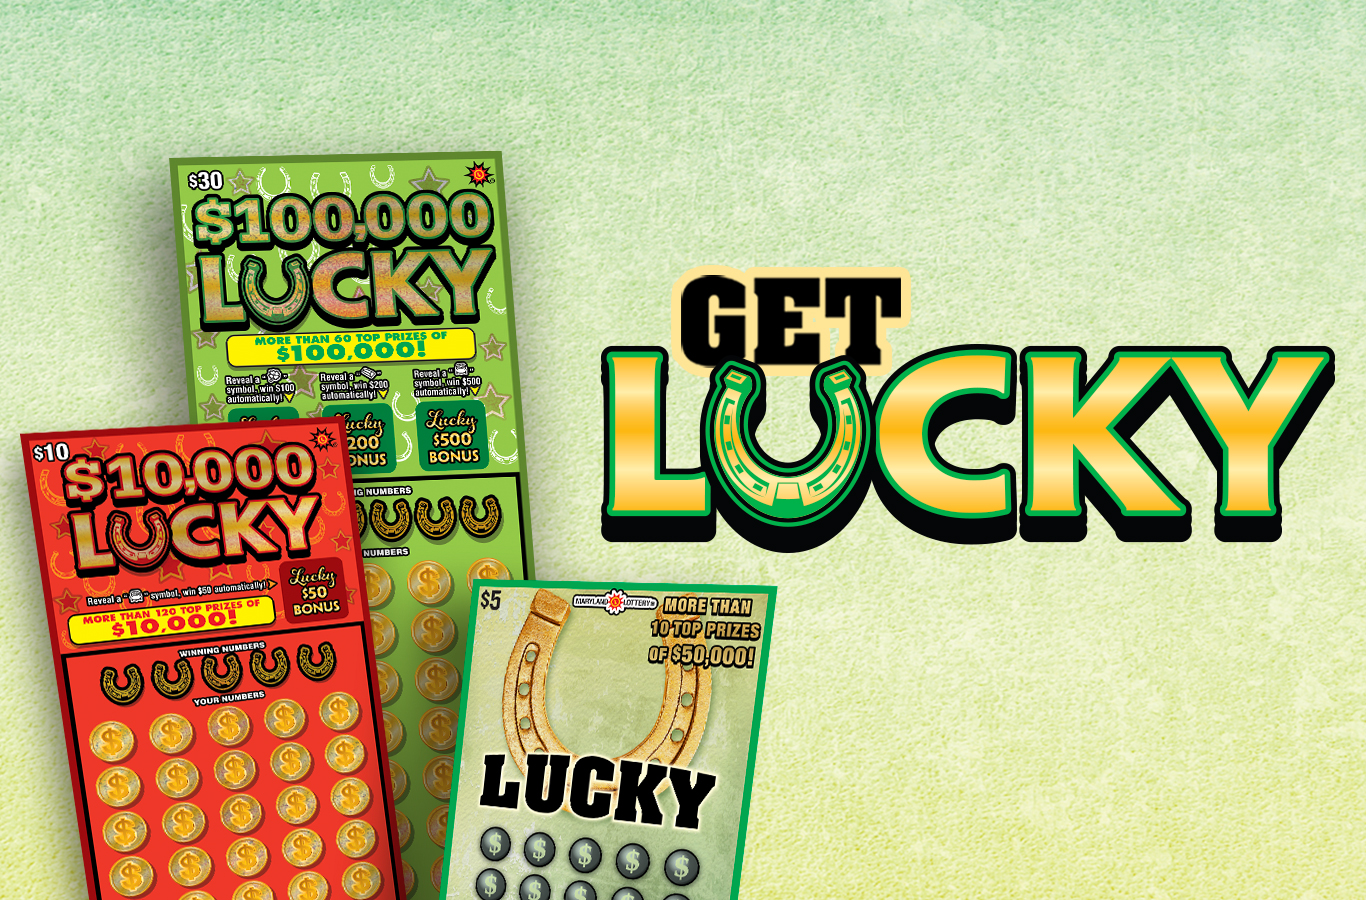 Feeling lucky? Play new Lucky Scratch-Offs! Three fun tickets bring lots of big cash prizes, and lots of chances to win.